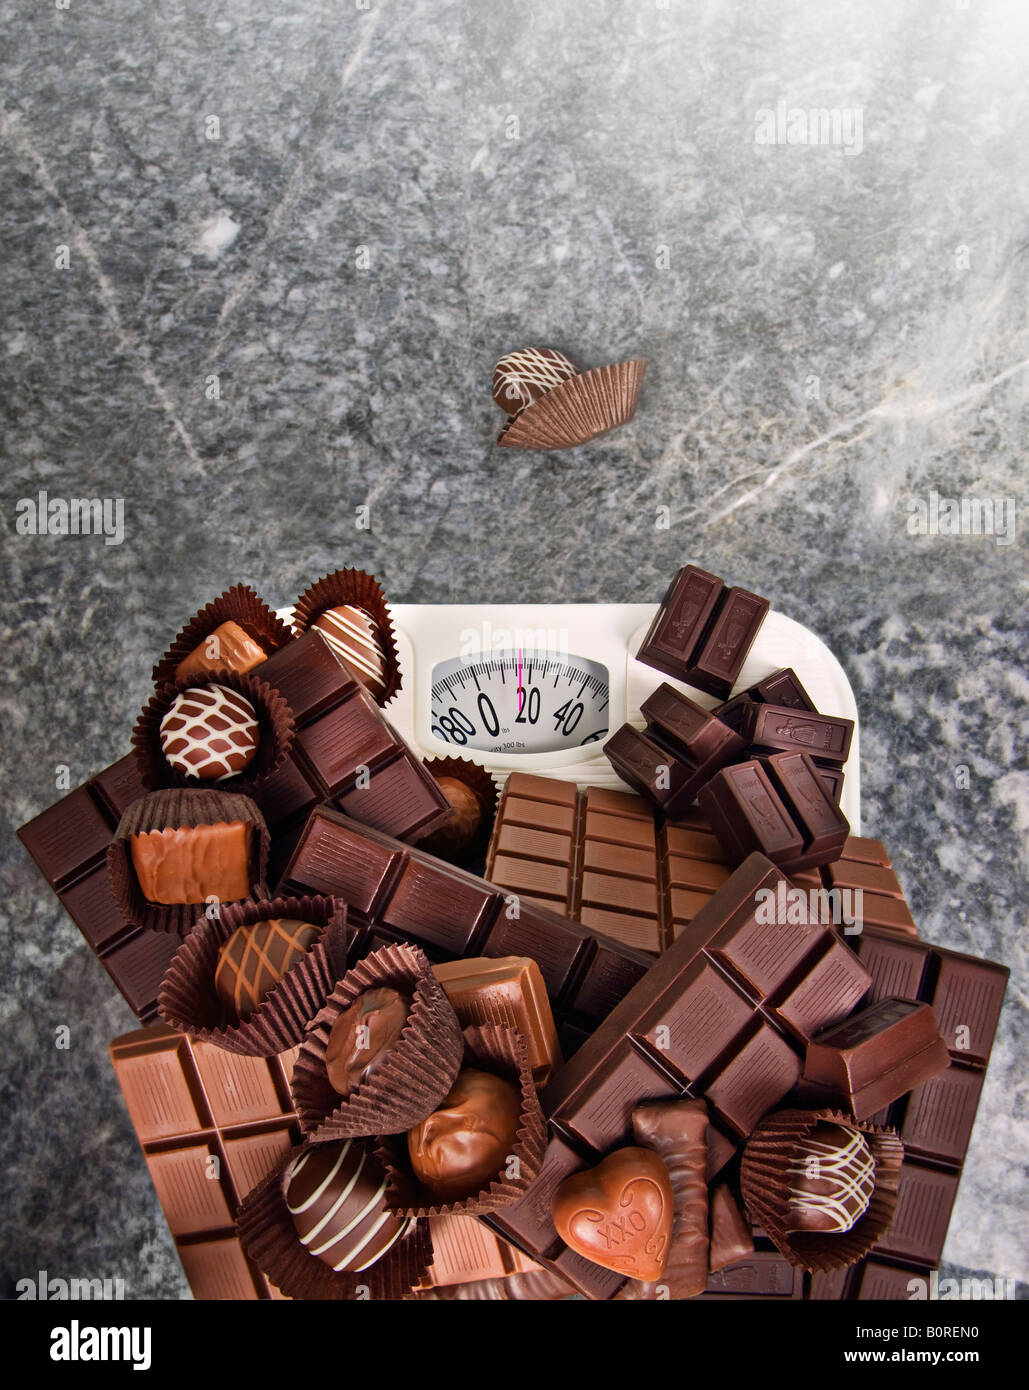 chocolate candy on a bathroom scale Stock Photo